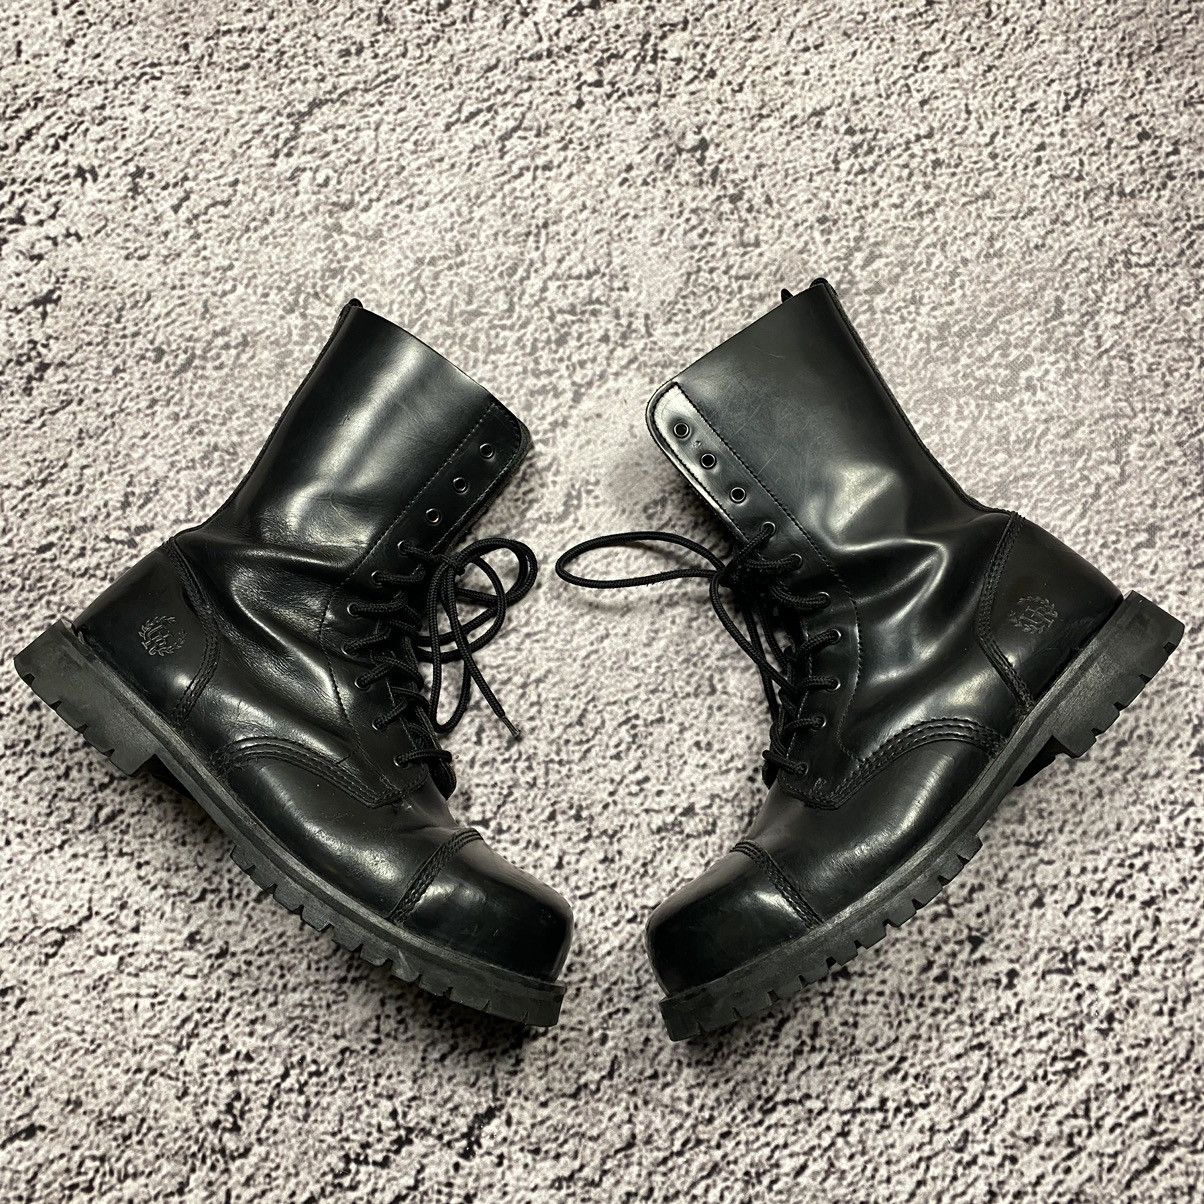 Pre-owned Avant Garde X Vintage High English Steel Toe Boots Like Dr Martens In Black